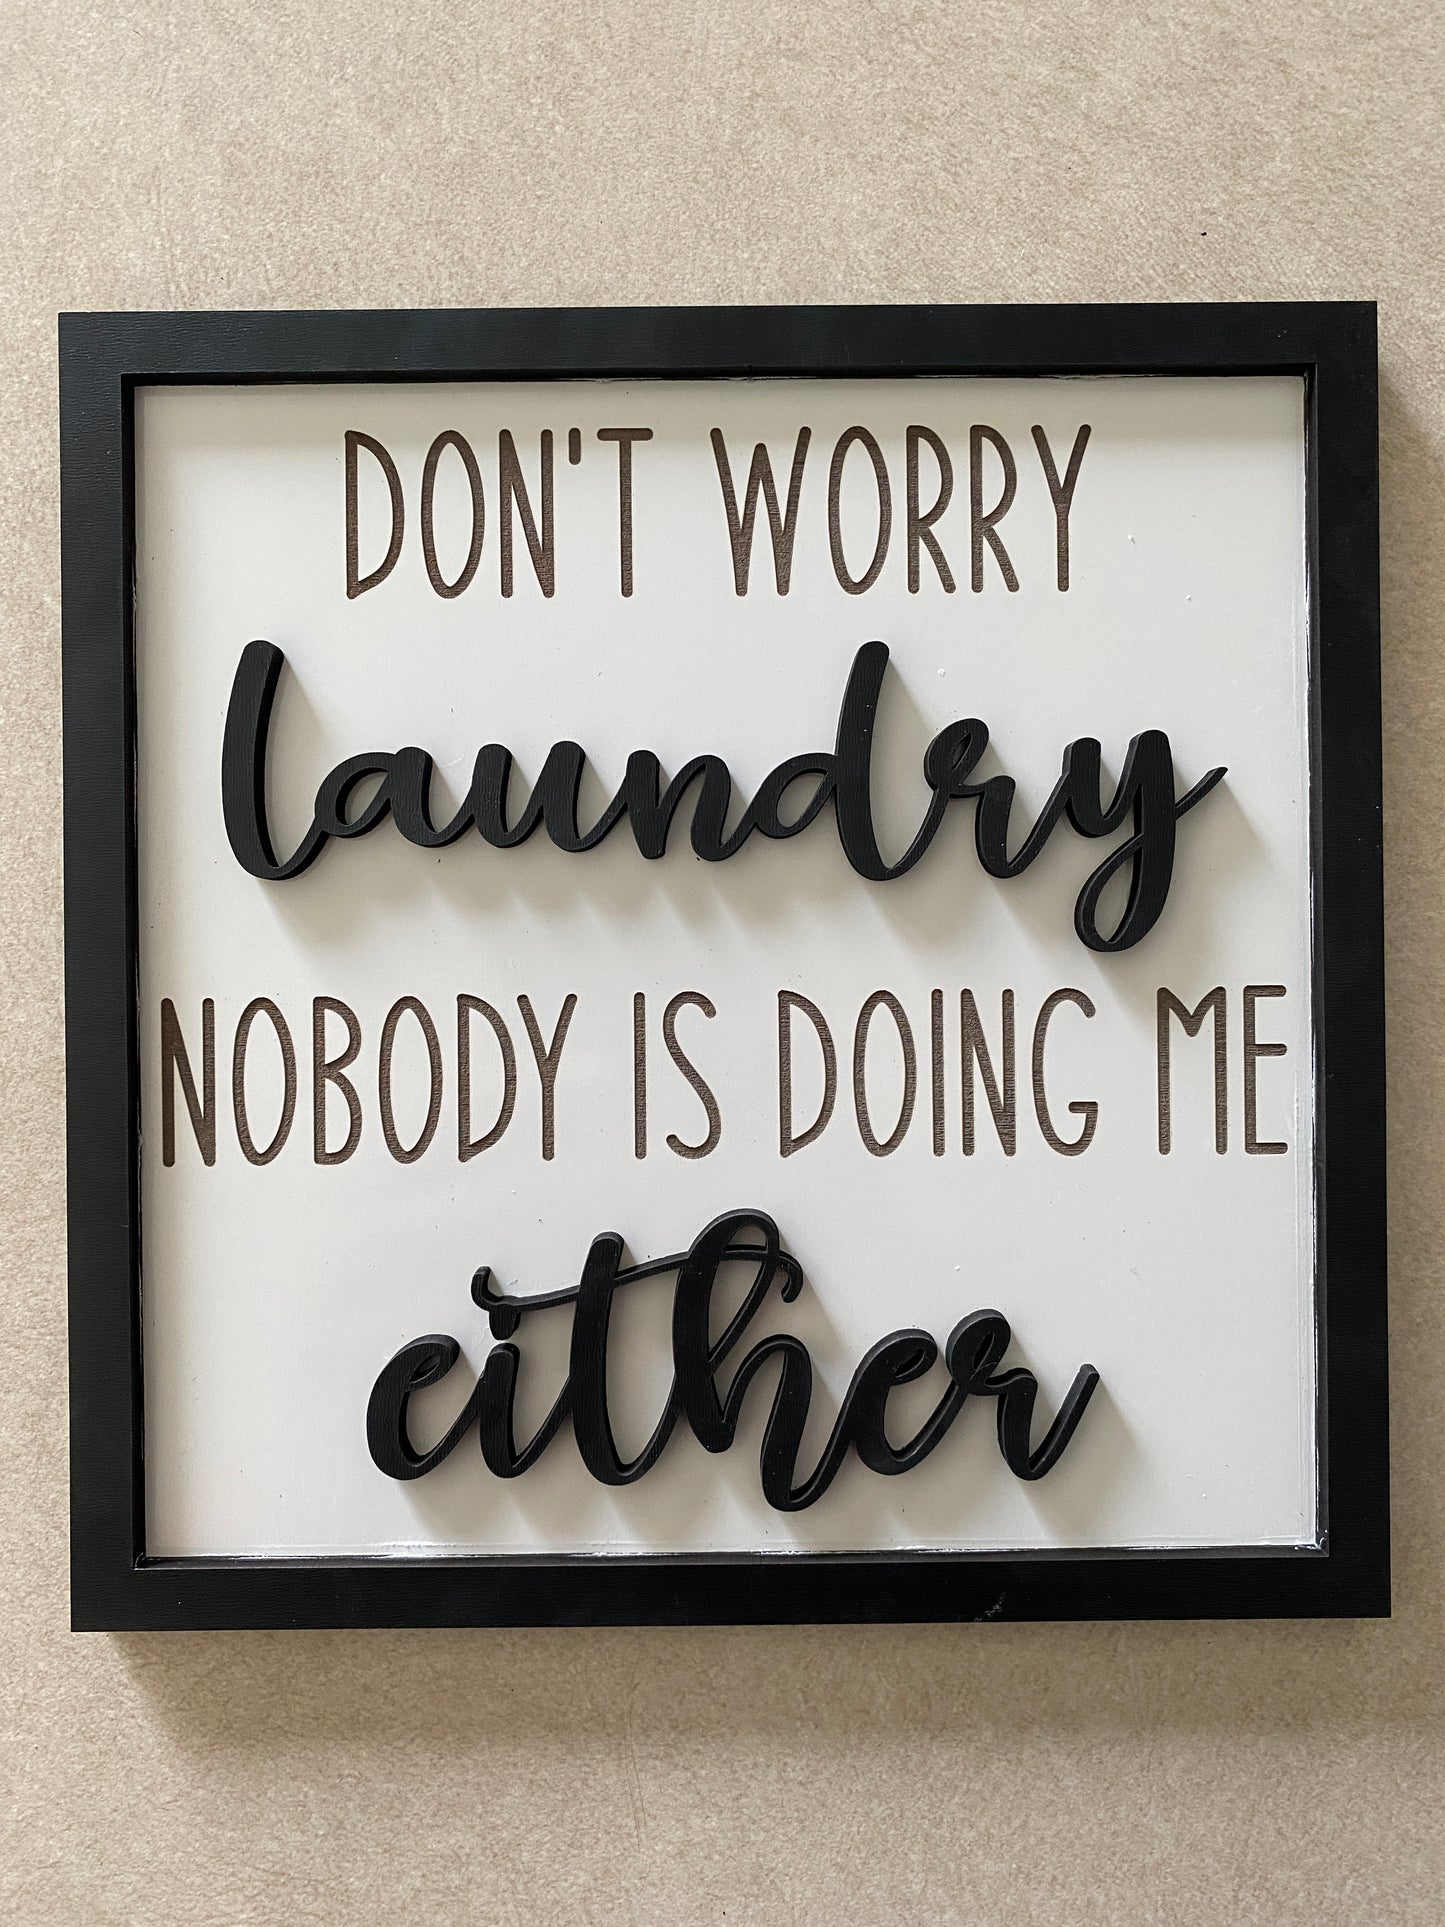 Don’t Worry Laundry, Nobody Is Doing Me Either sign